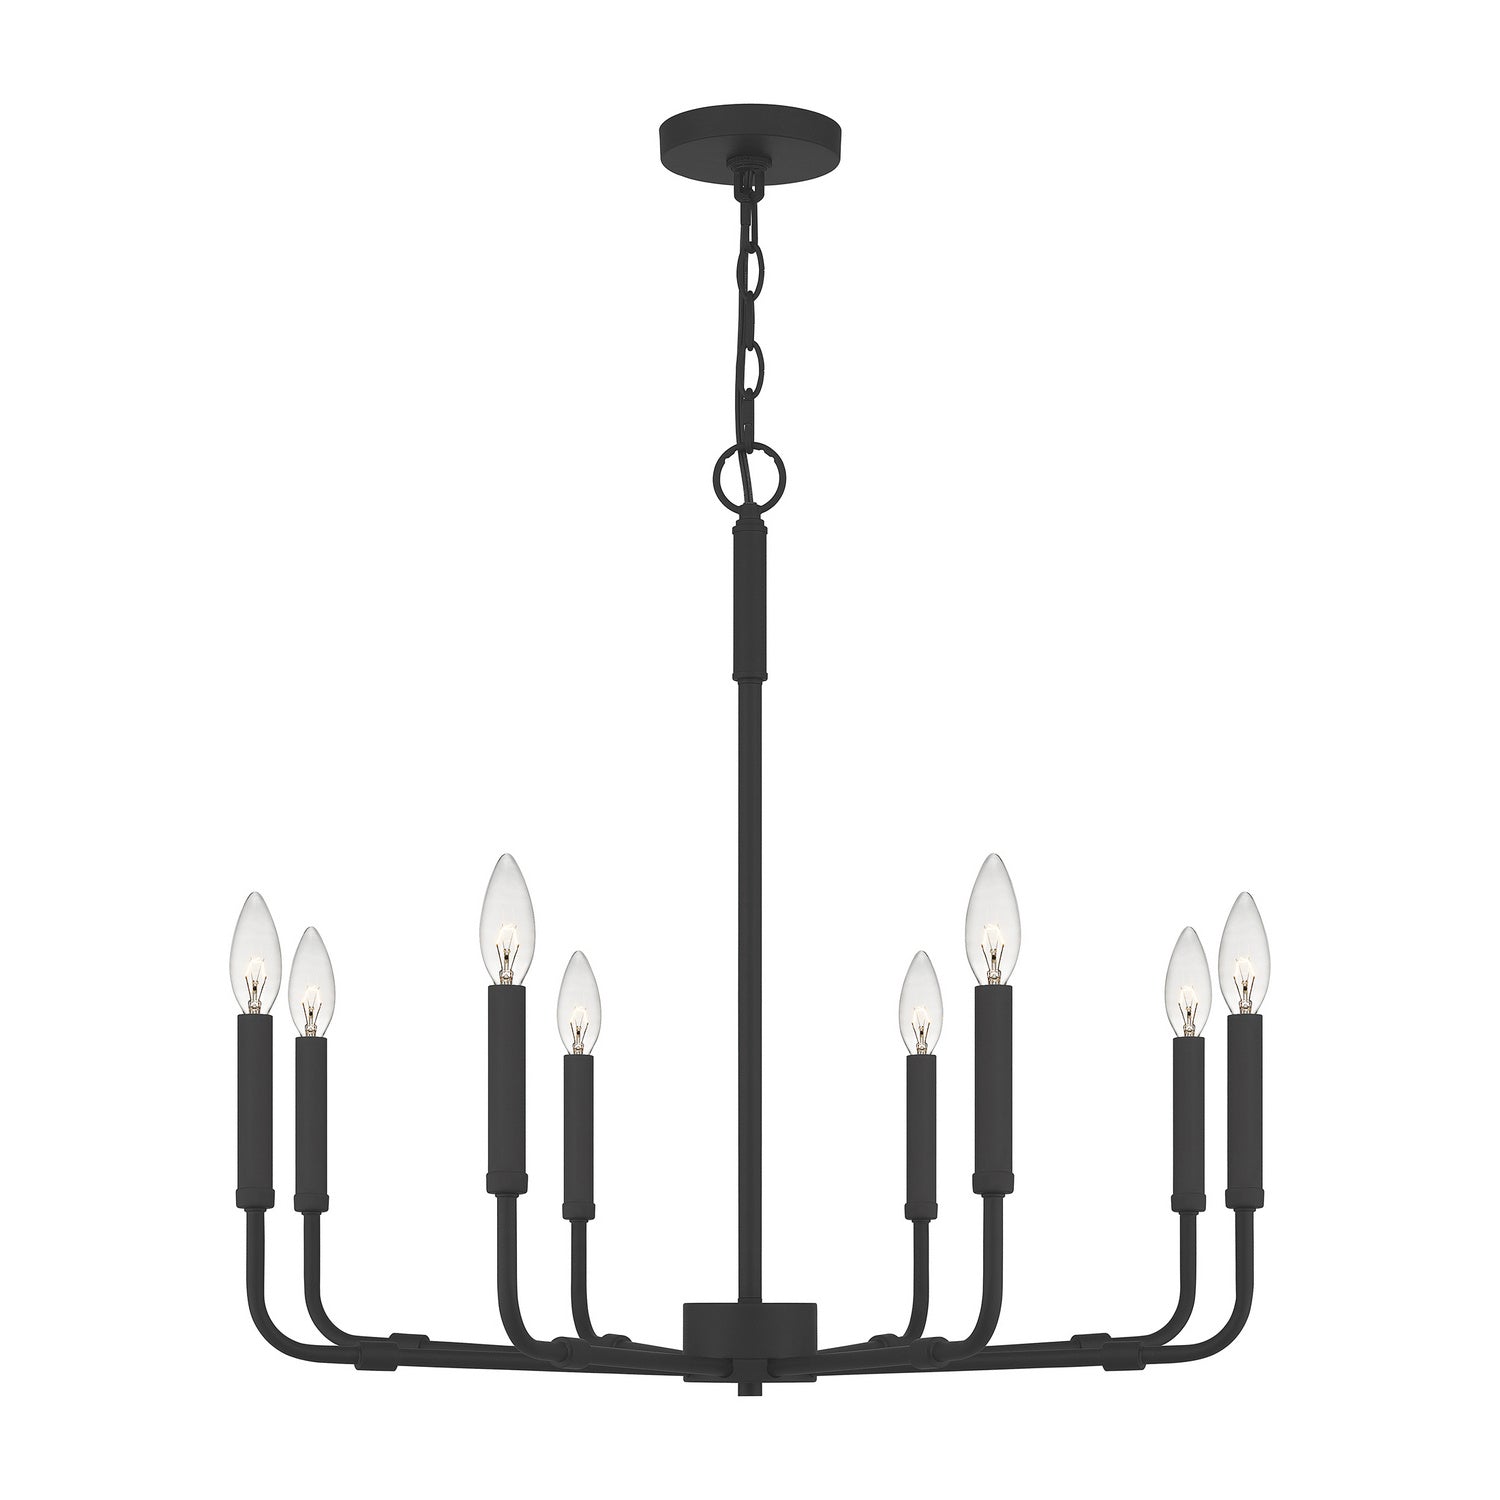 Abner Eight Light Chandelier by Quoizel in Matte Black Finish (ABR5028MBK)